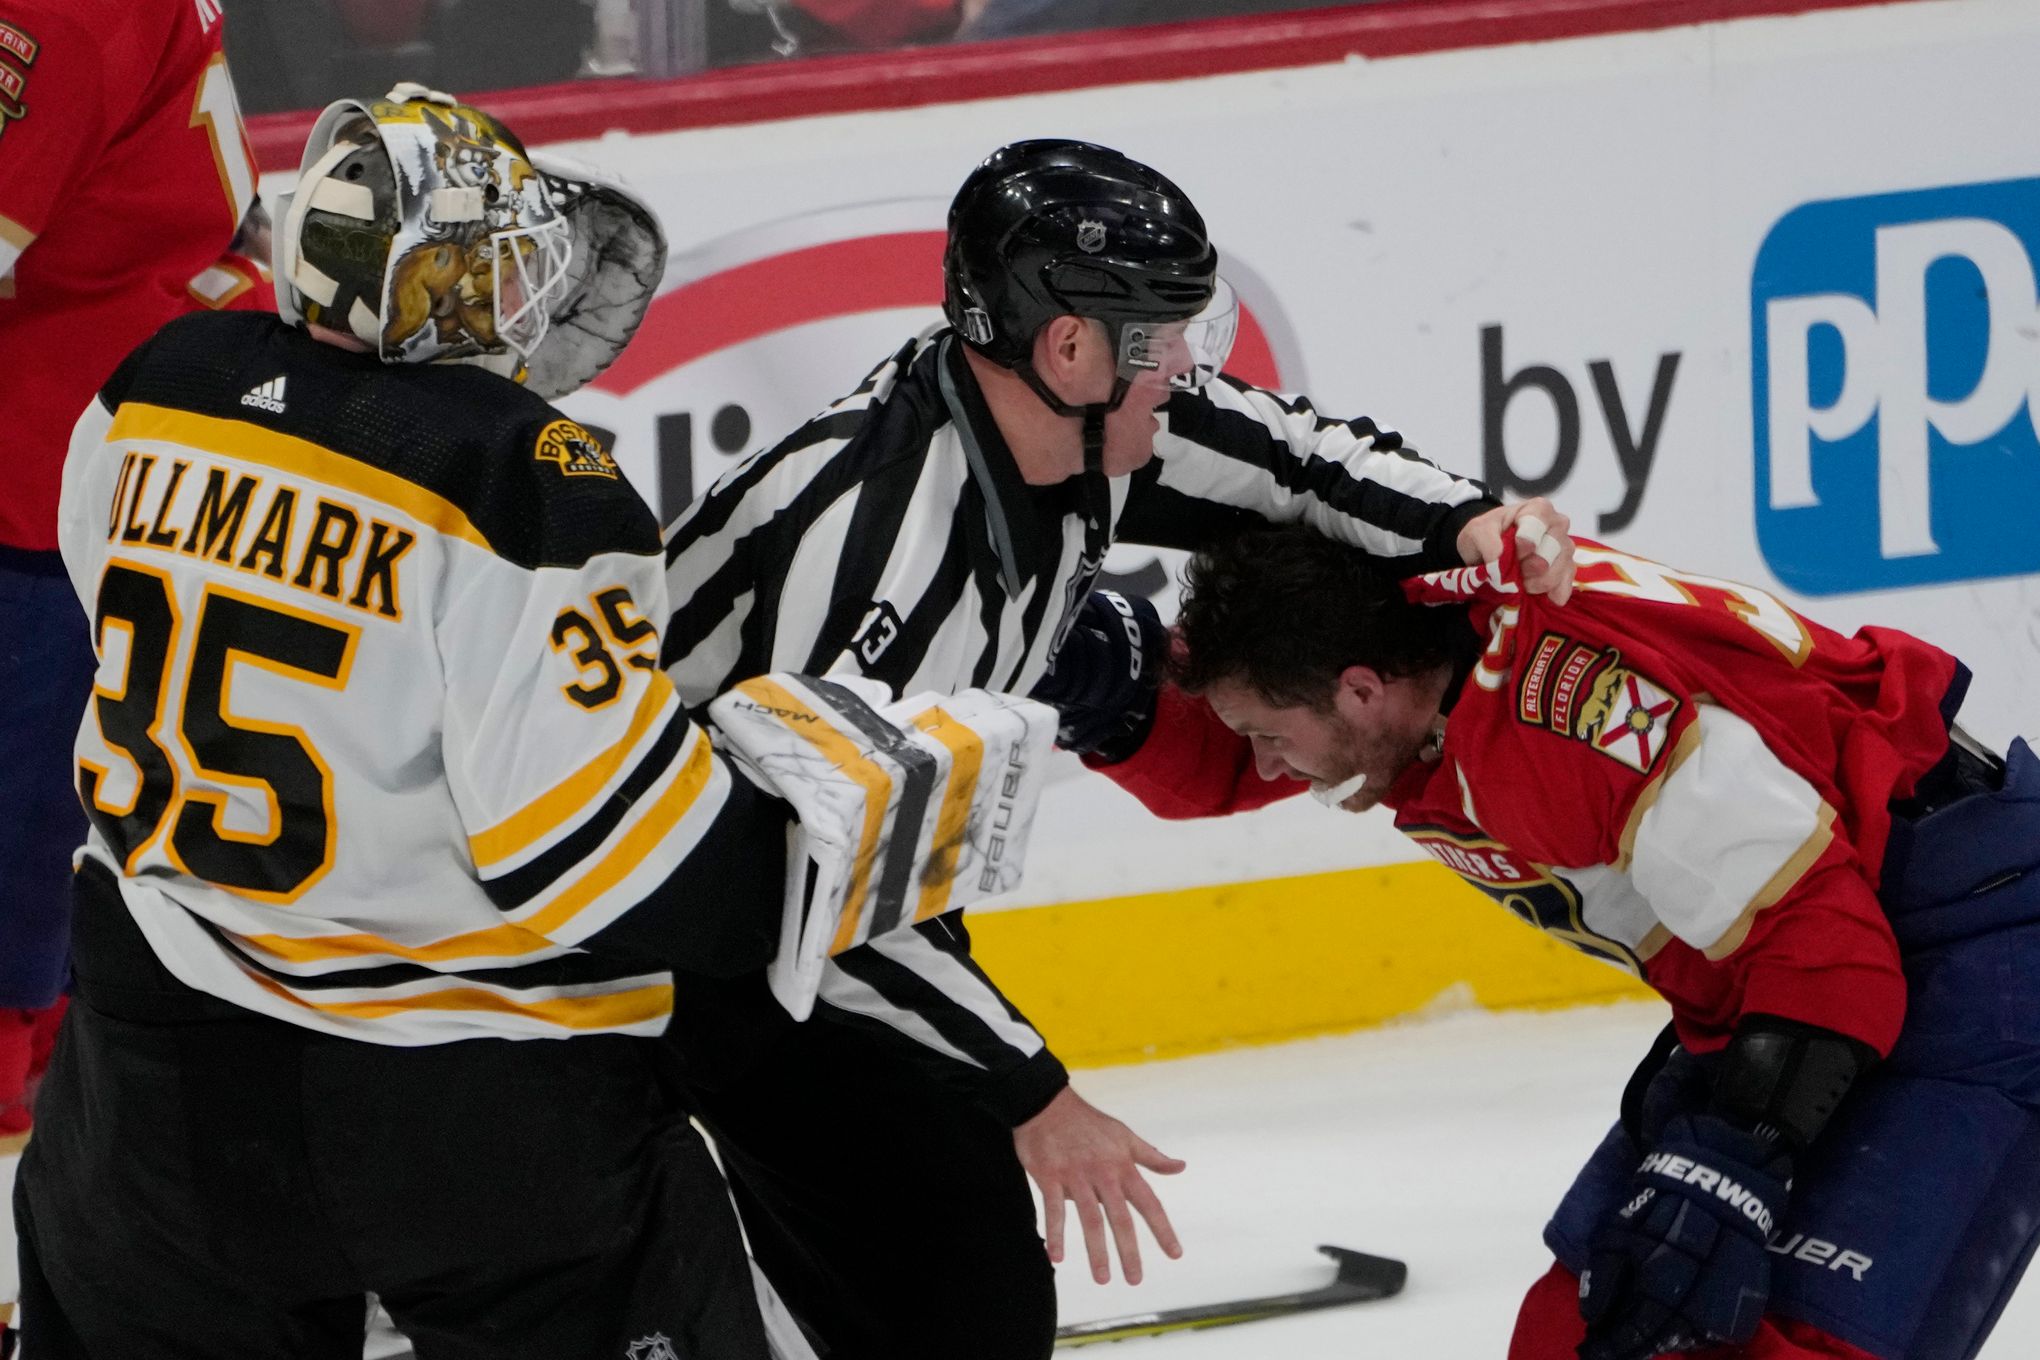 PUNCHING A Ticket to the Stanley Cup Finals w/ Florida Panthers' Sam Bennett